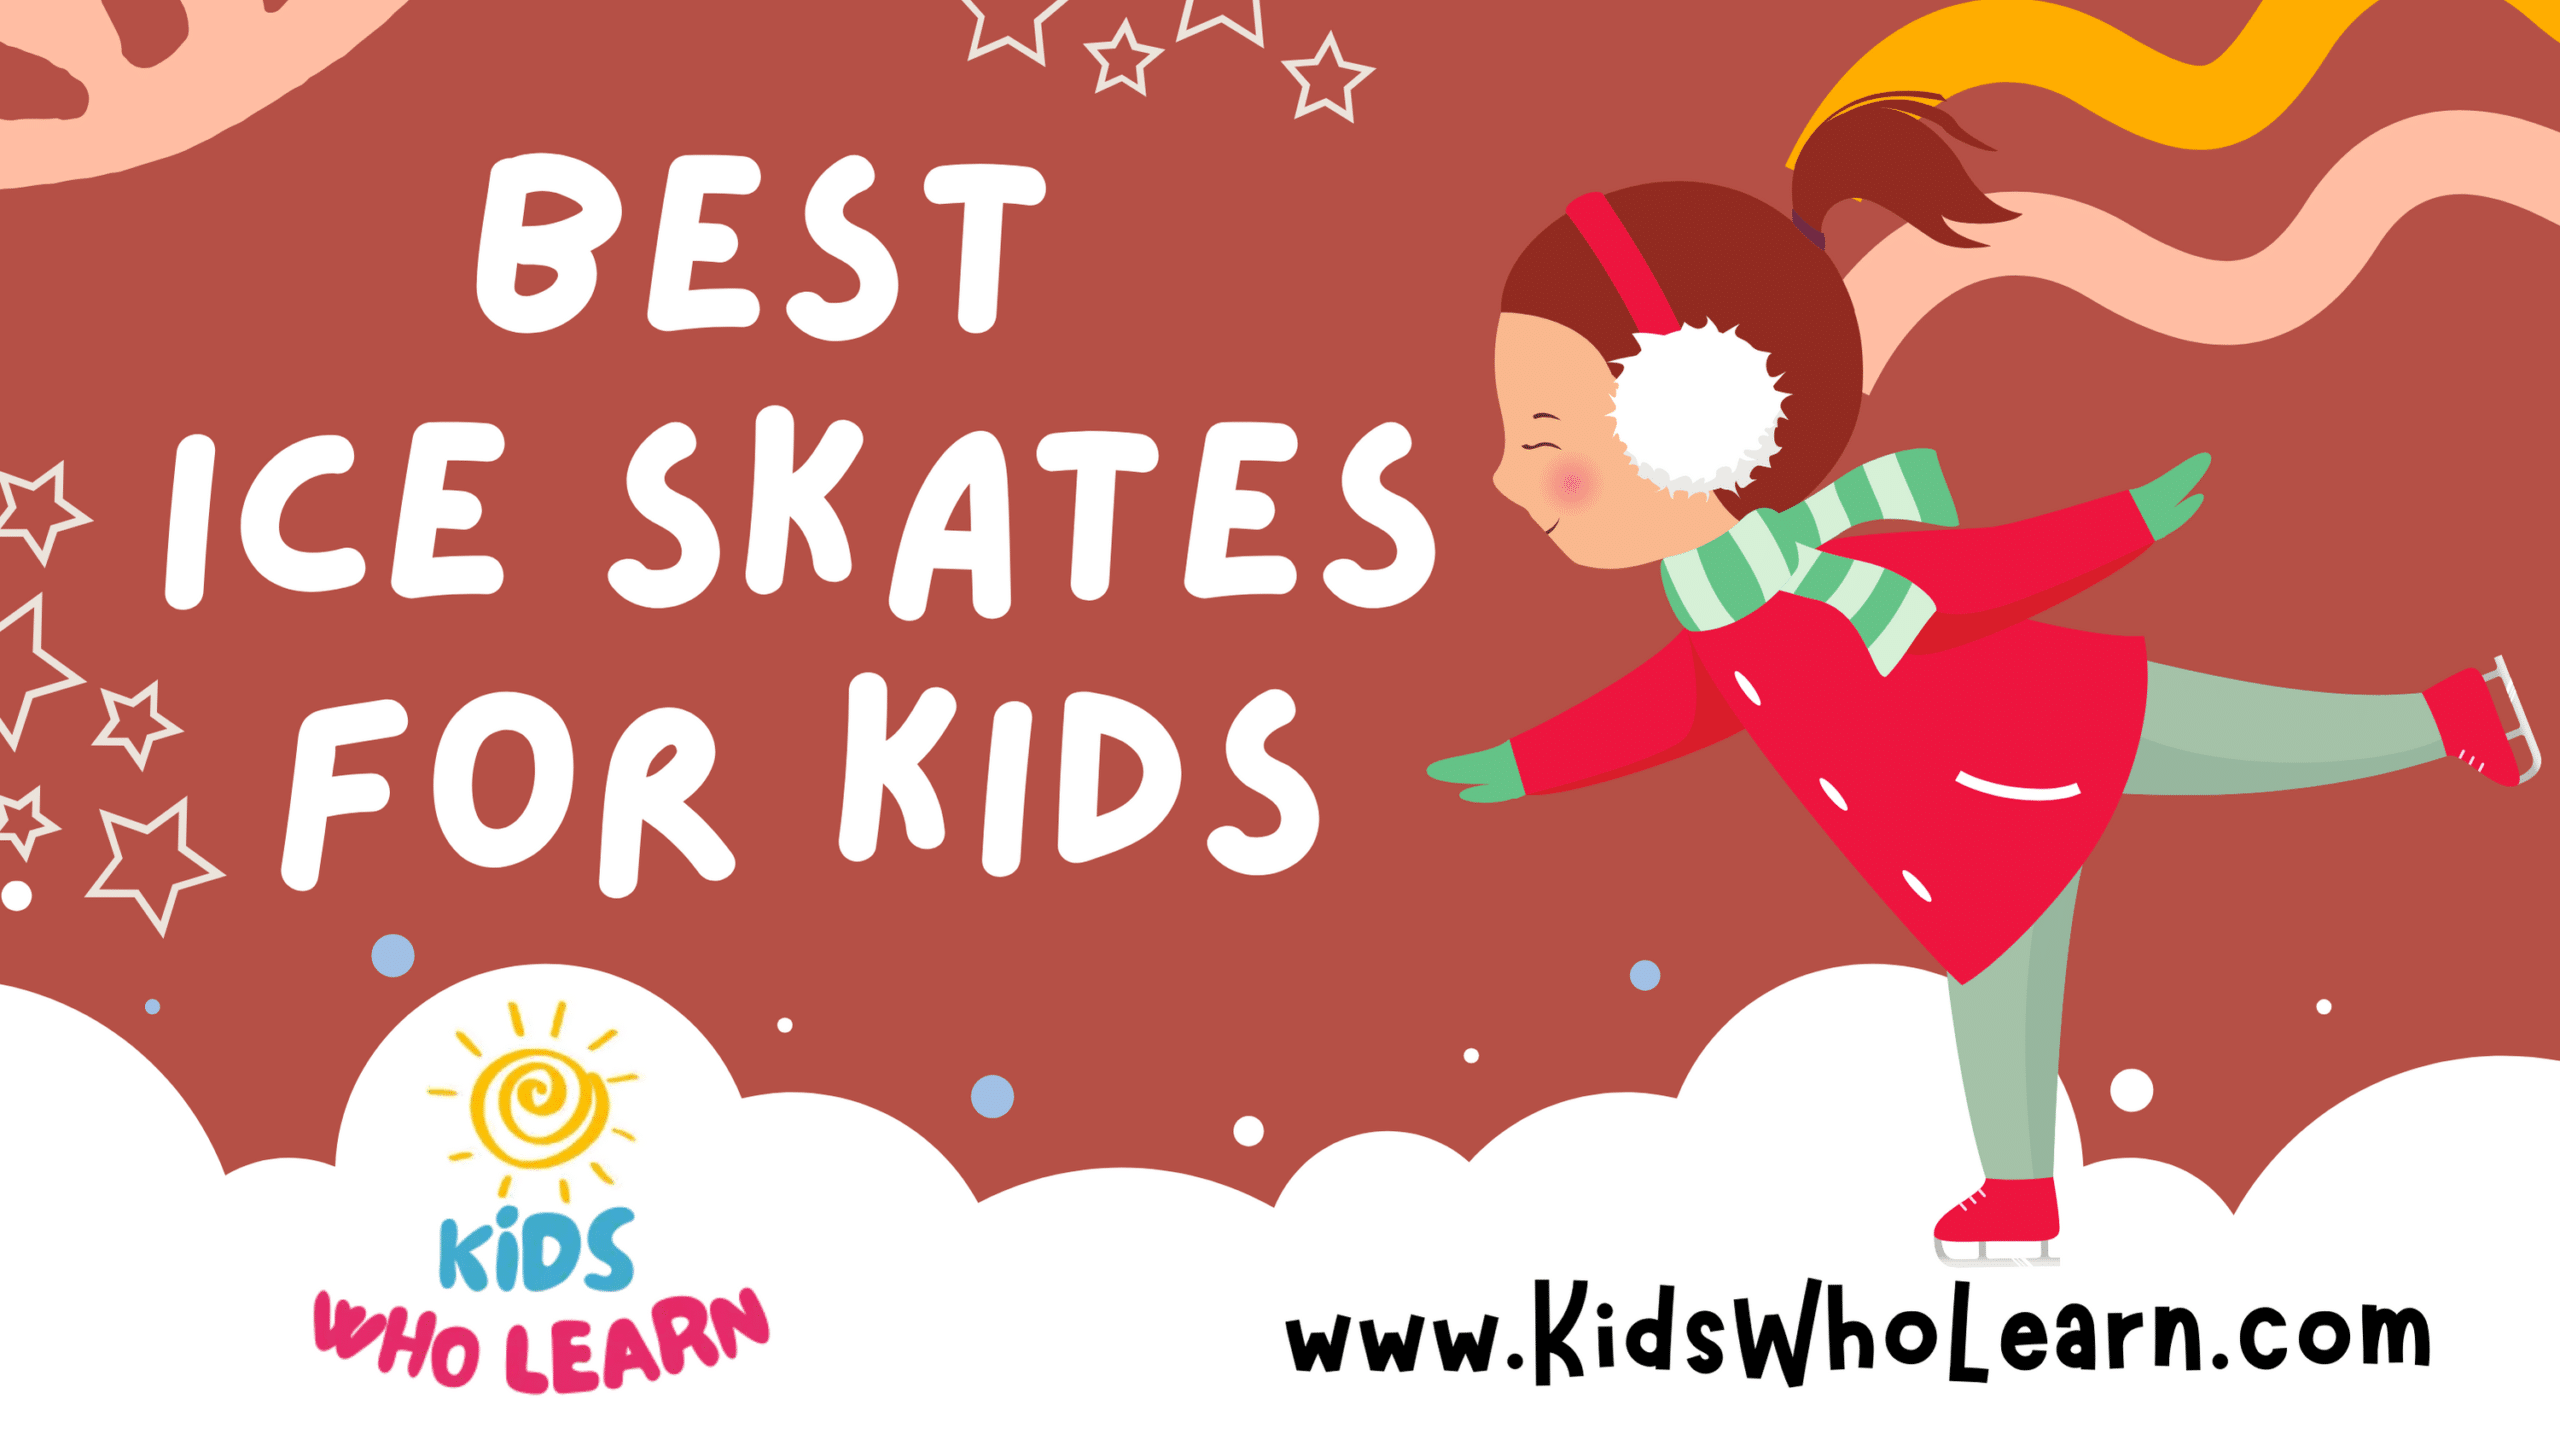 The Best Ice Skates for Kids: The Ultimate Guide